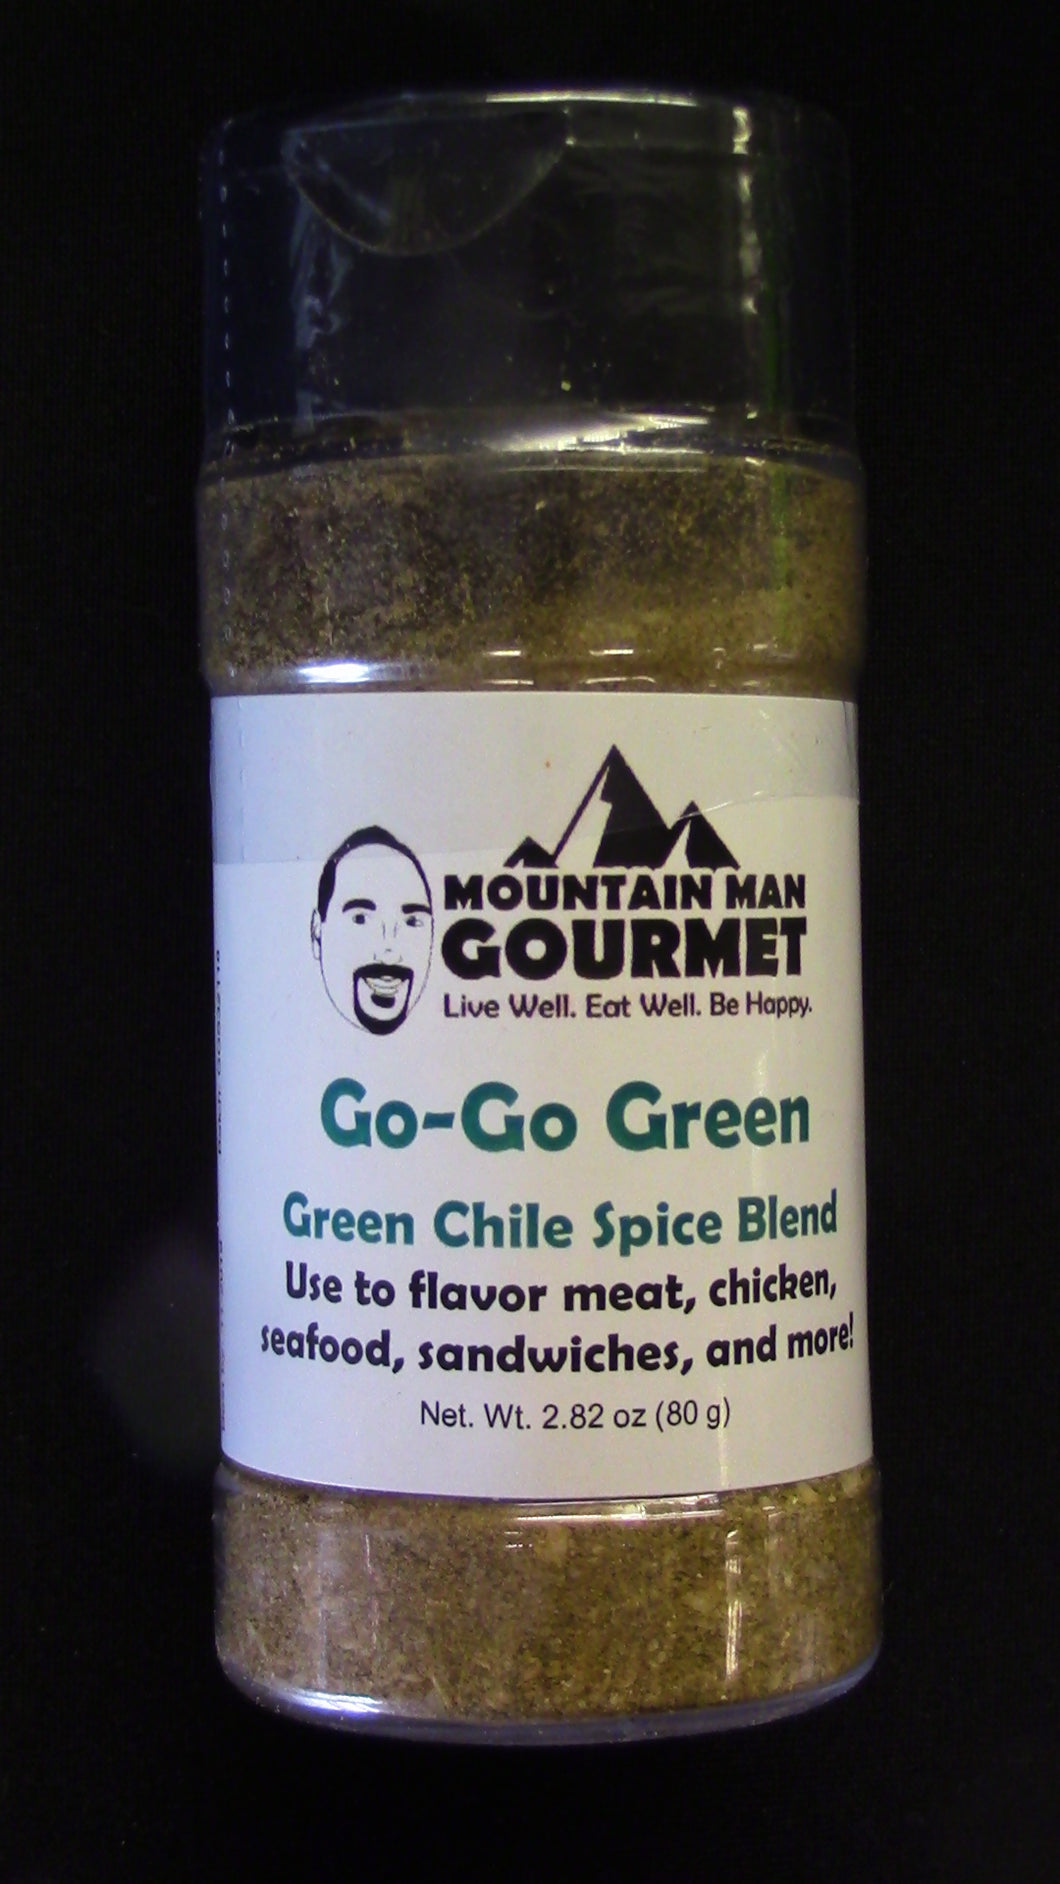 Go-Go Green Chile Spice Blend